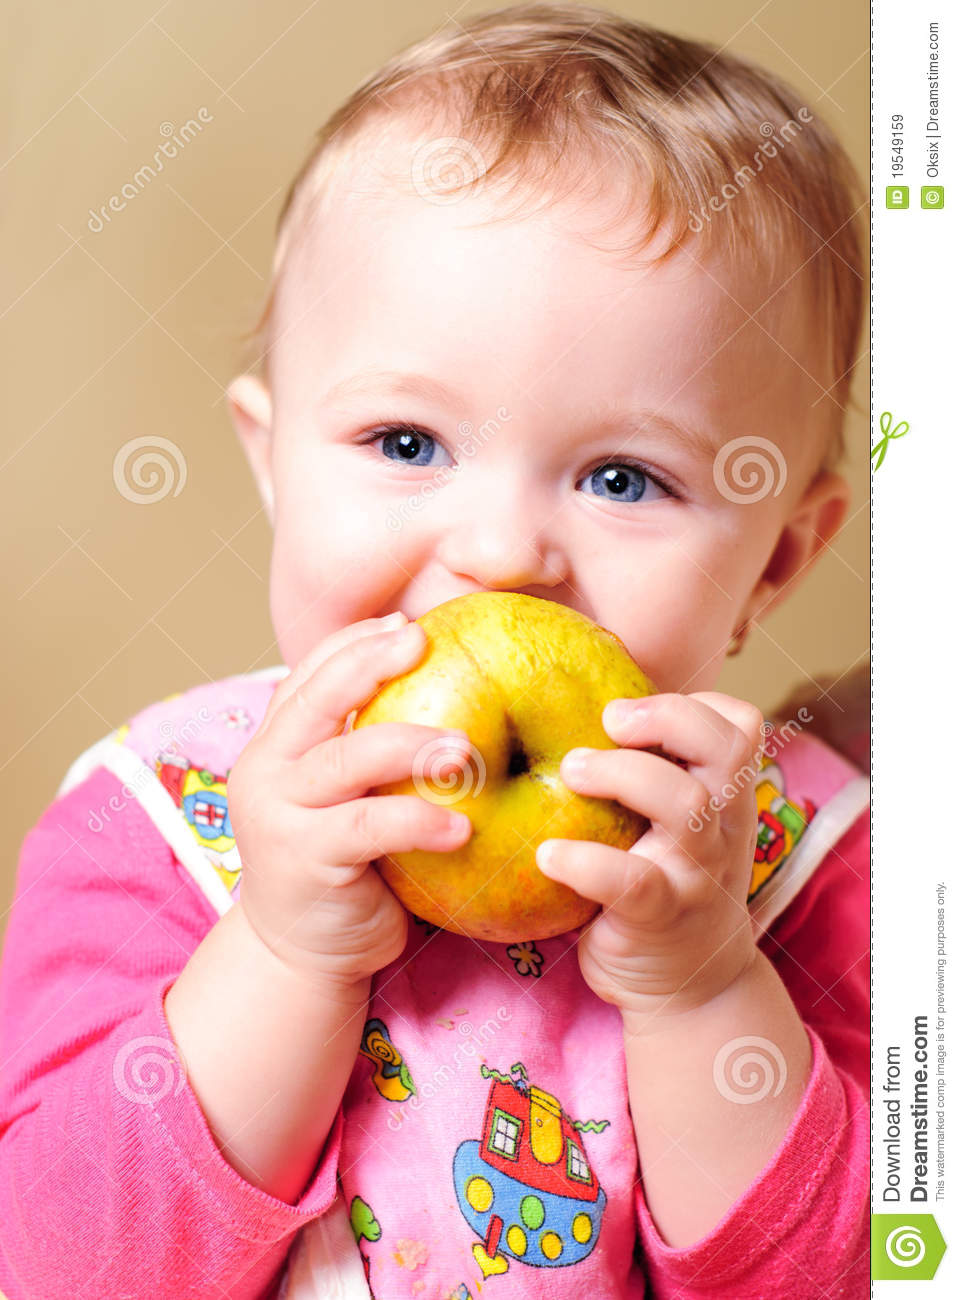 Girl Eating Apple Royalty Free Stock Images   Image  19549159